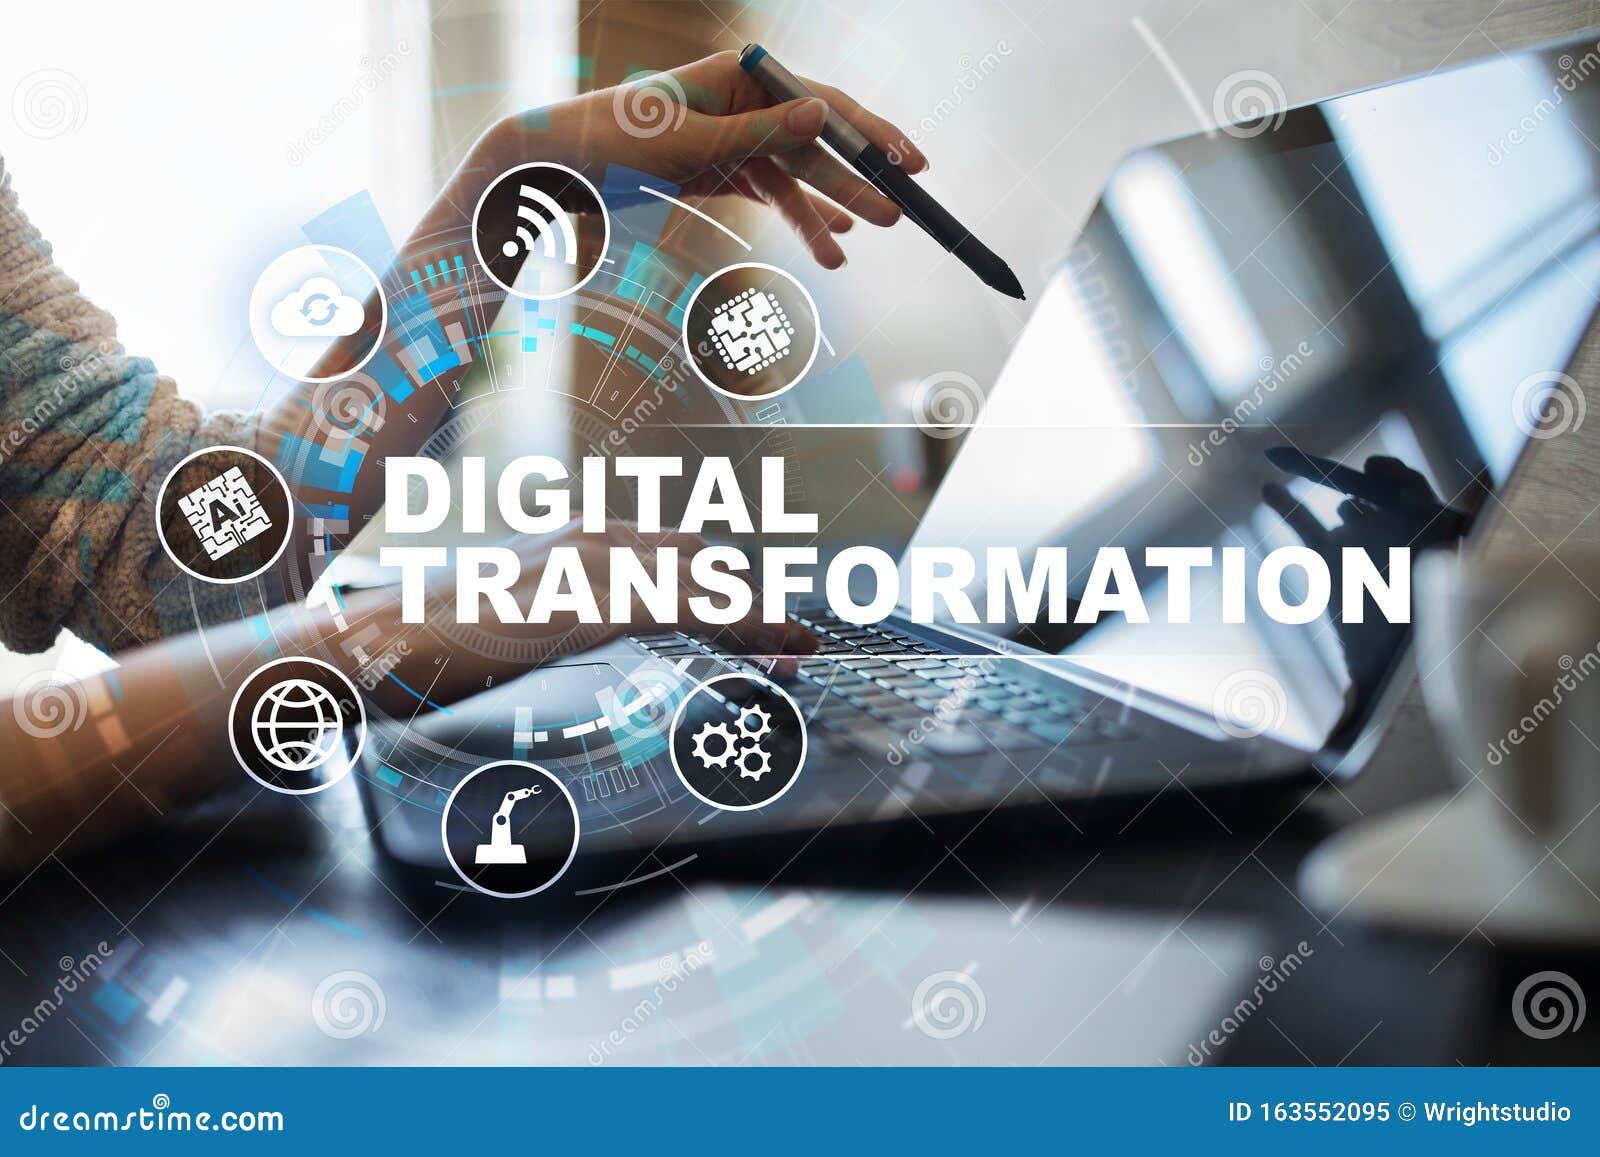 digital transformation, concept of digitization of business processes and modern technology.